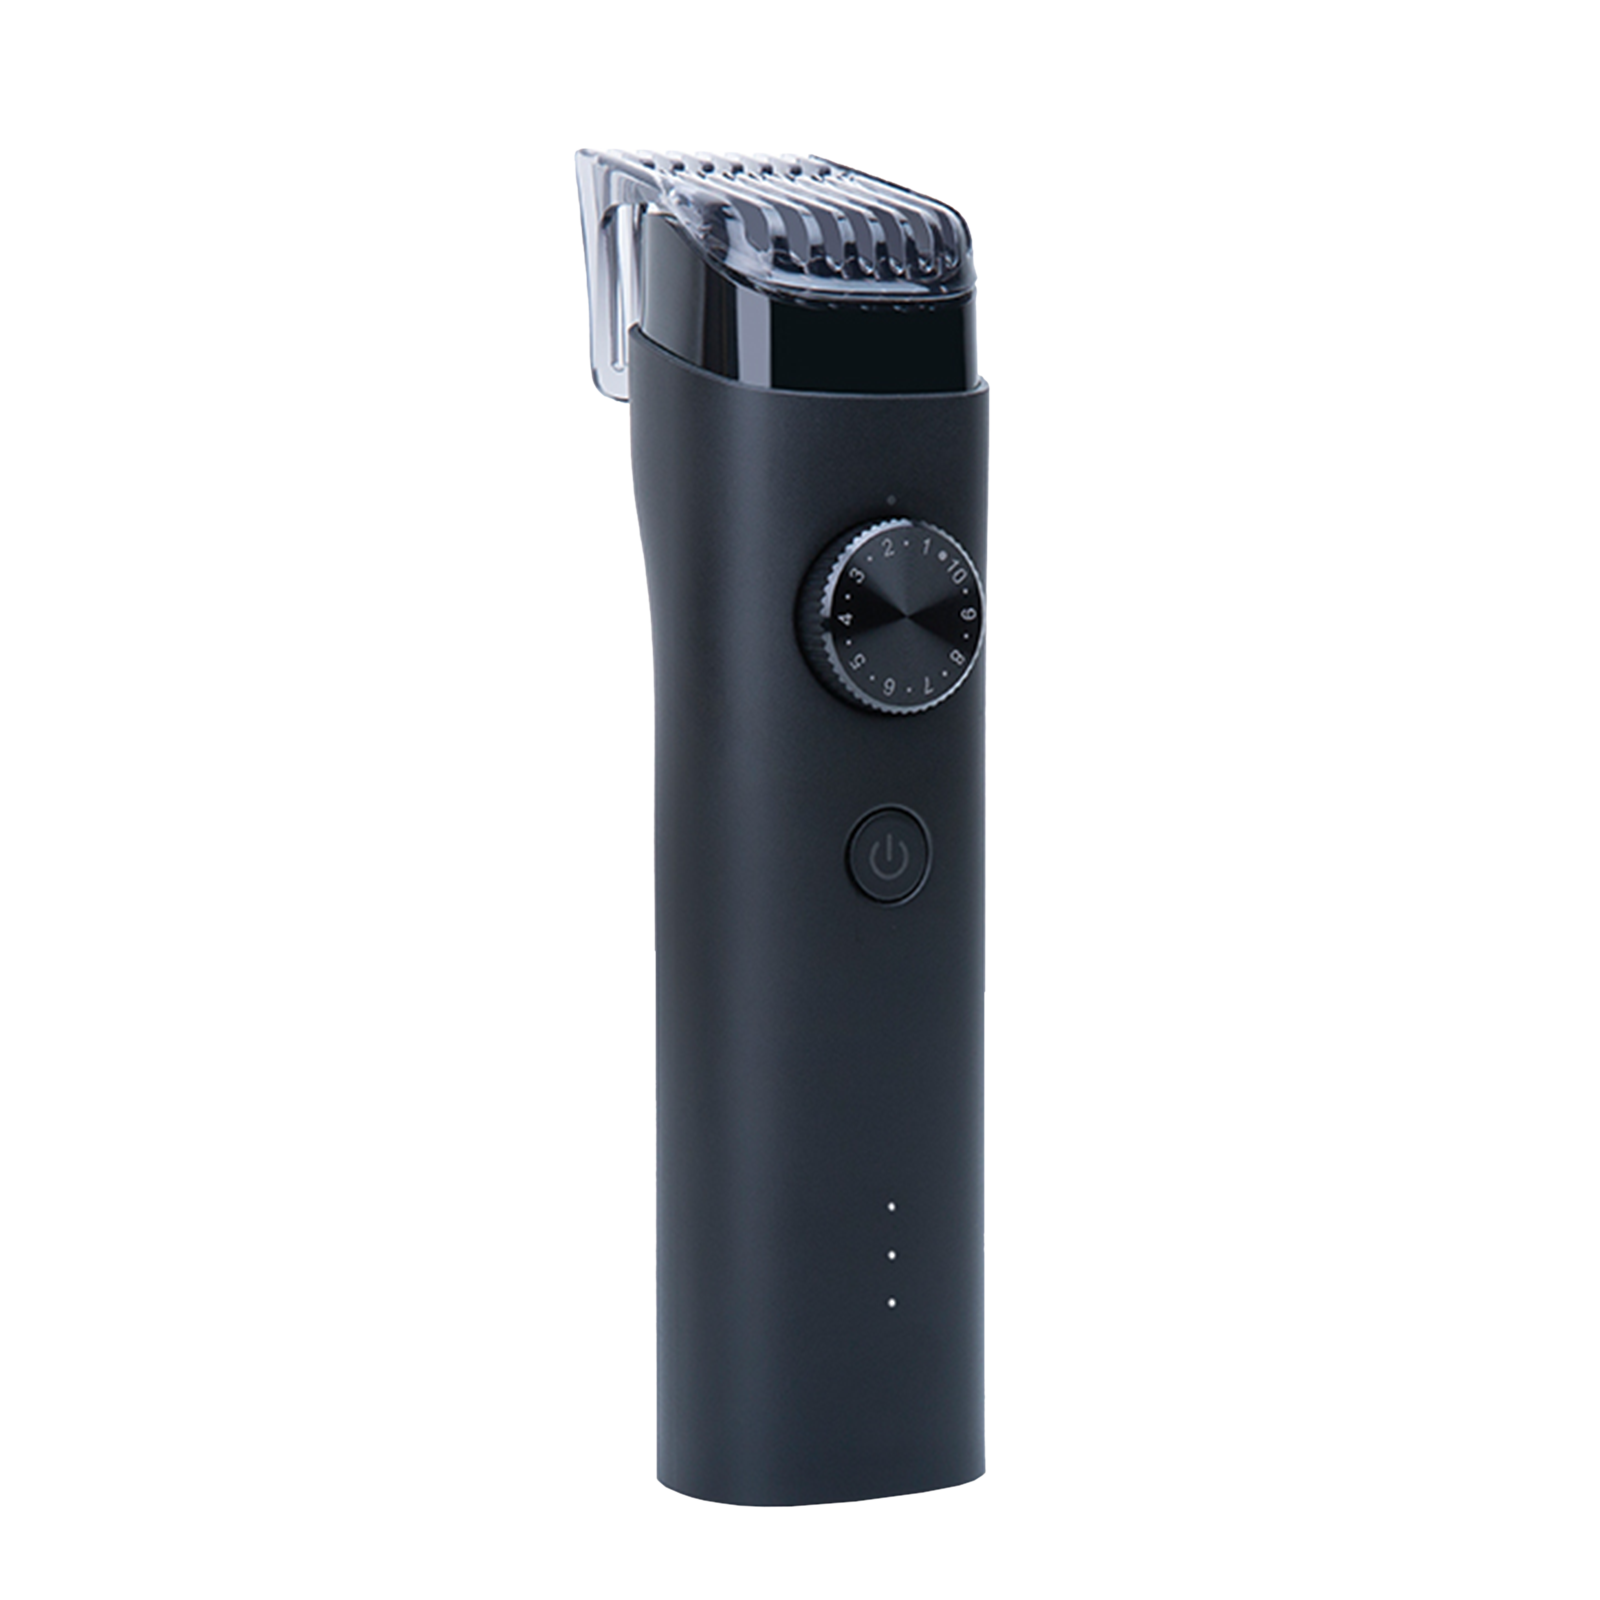 Xiaomi Rechargeable Corded & Cordless Dry Trimmer for Beard & Moustache with 40 Length Settings for Men (90mins Runtime, IPX7 Waterproof, Black)